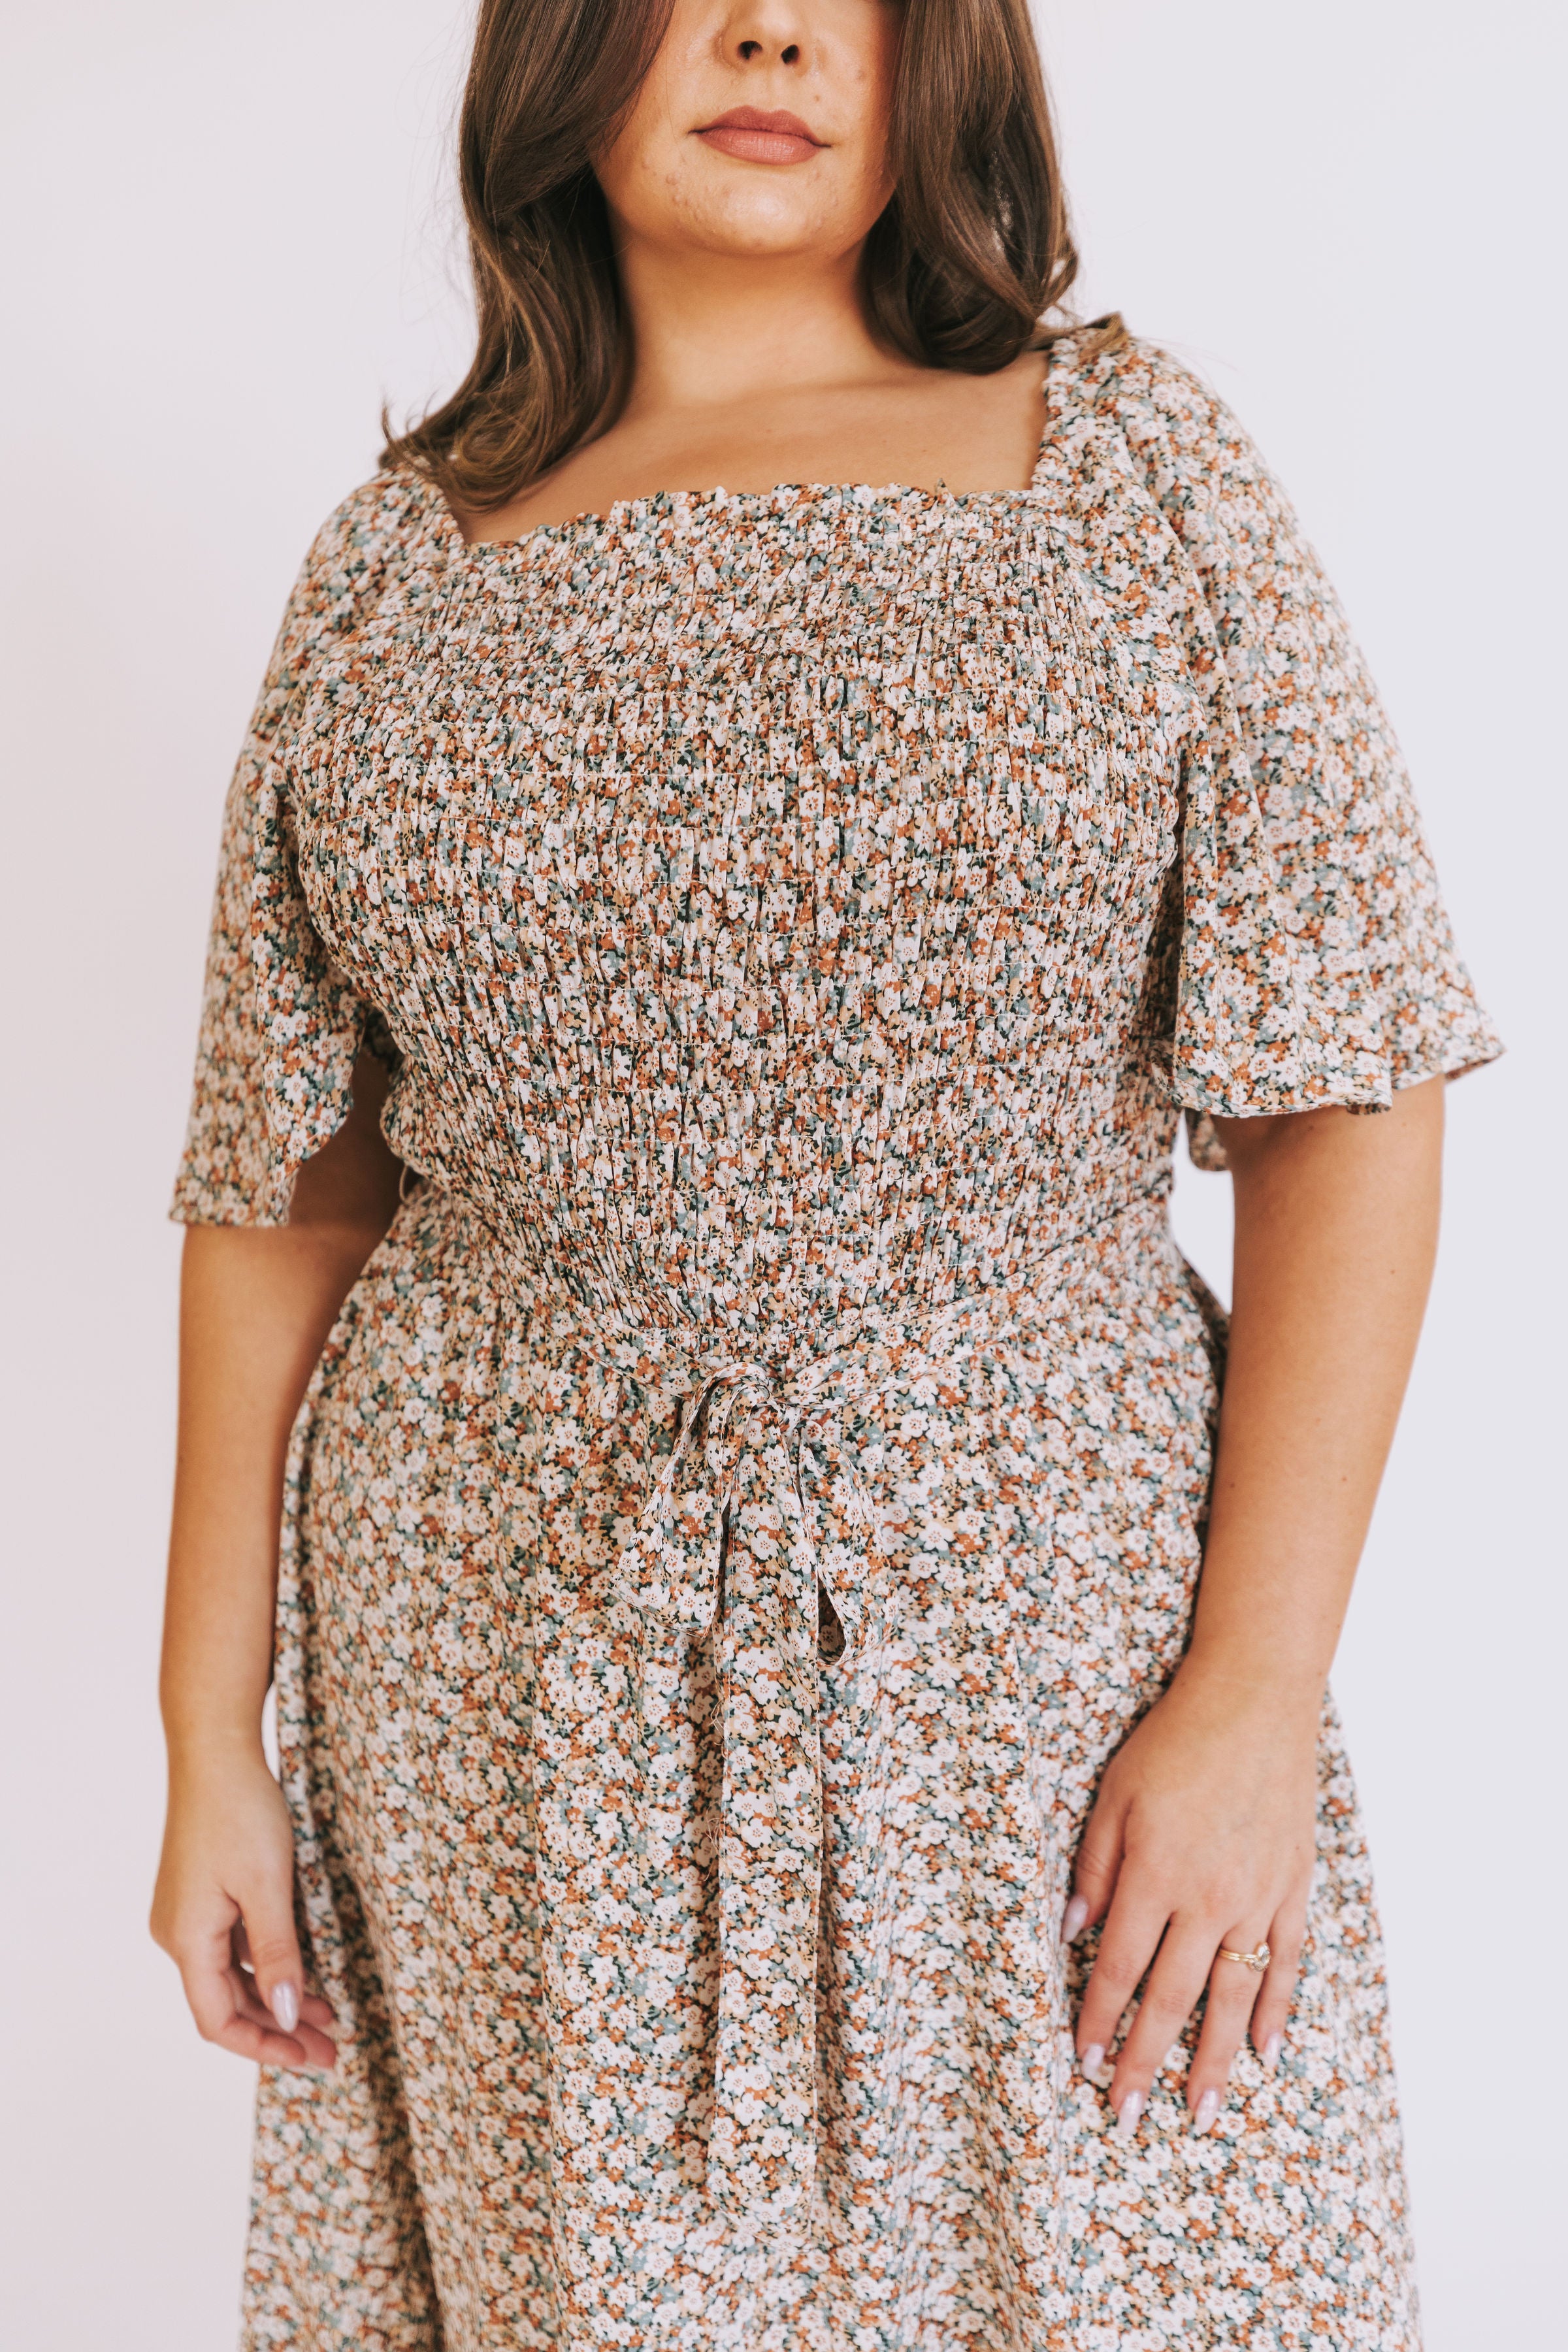 PLUS SIZE - Be Yourself Dress